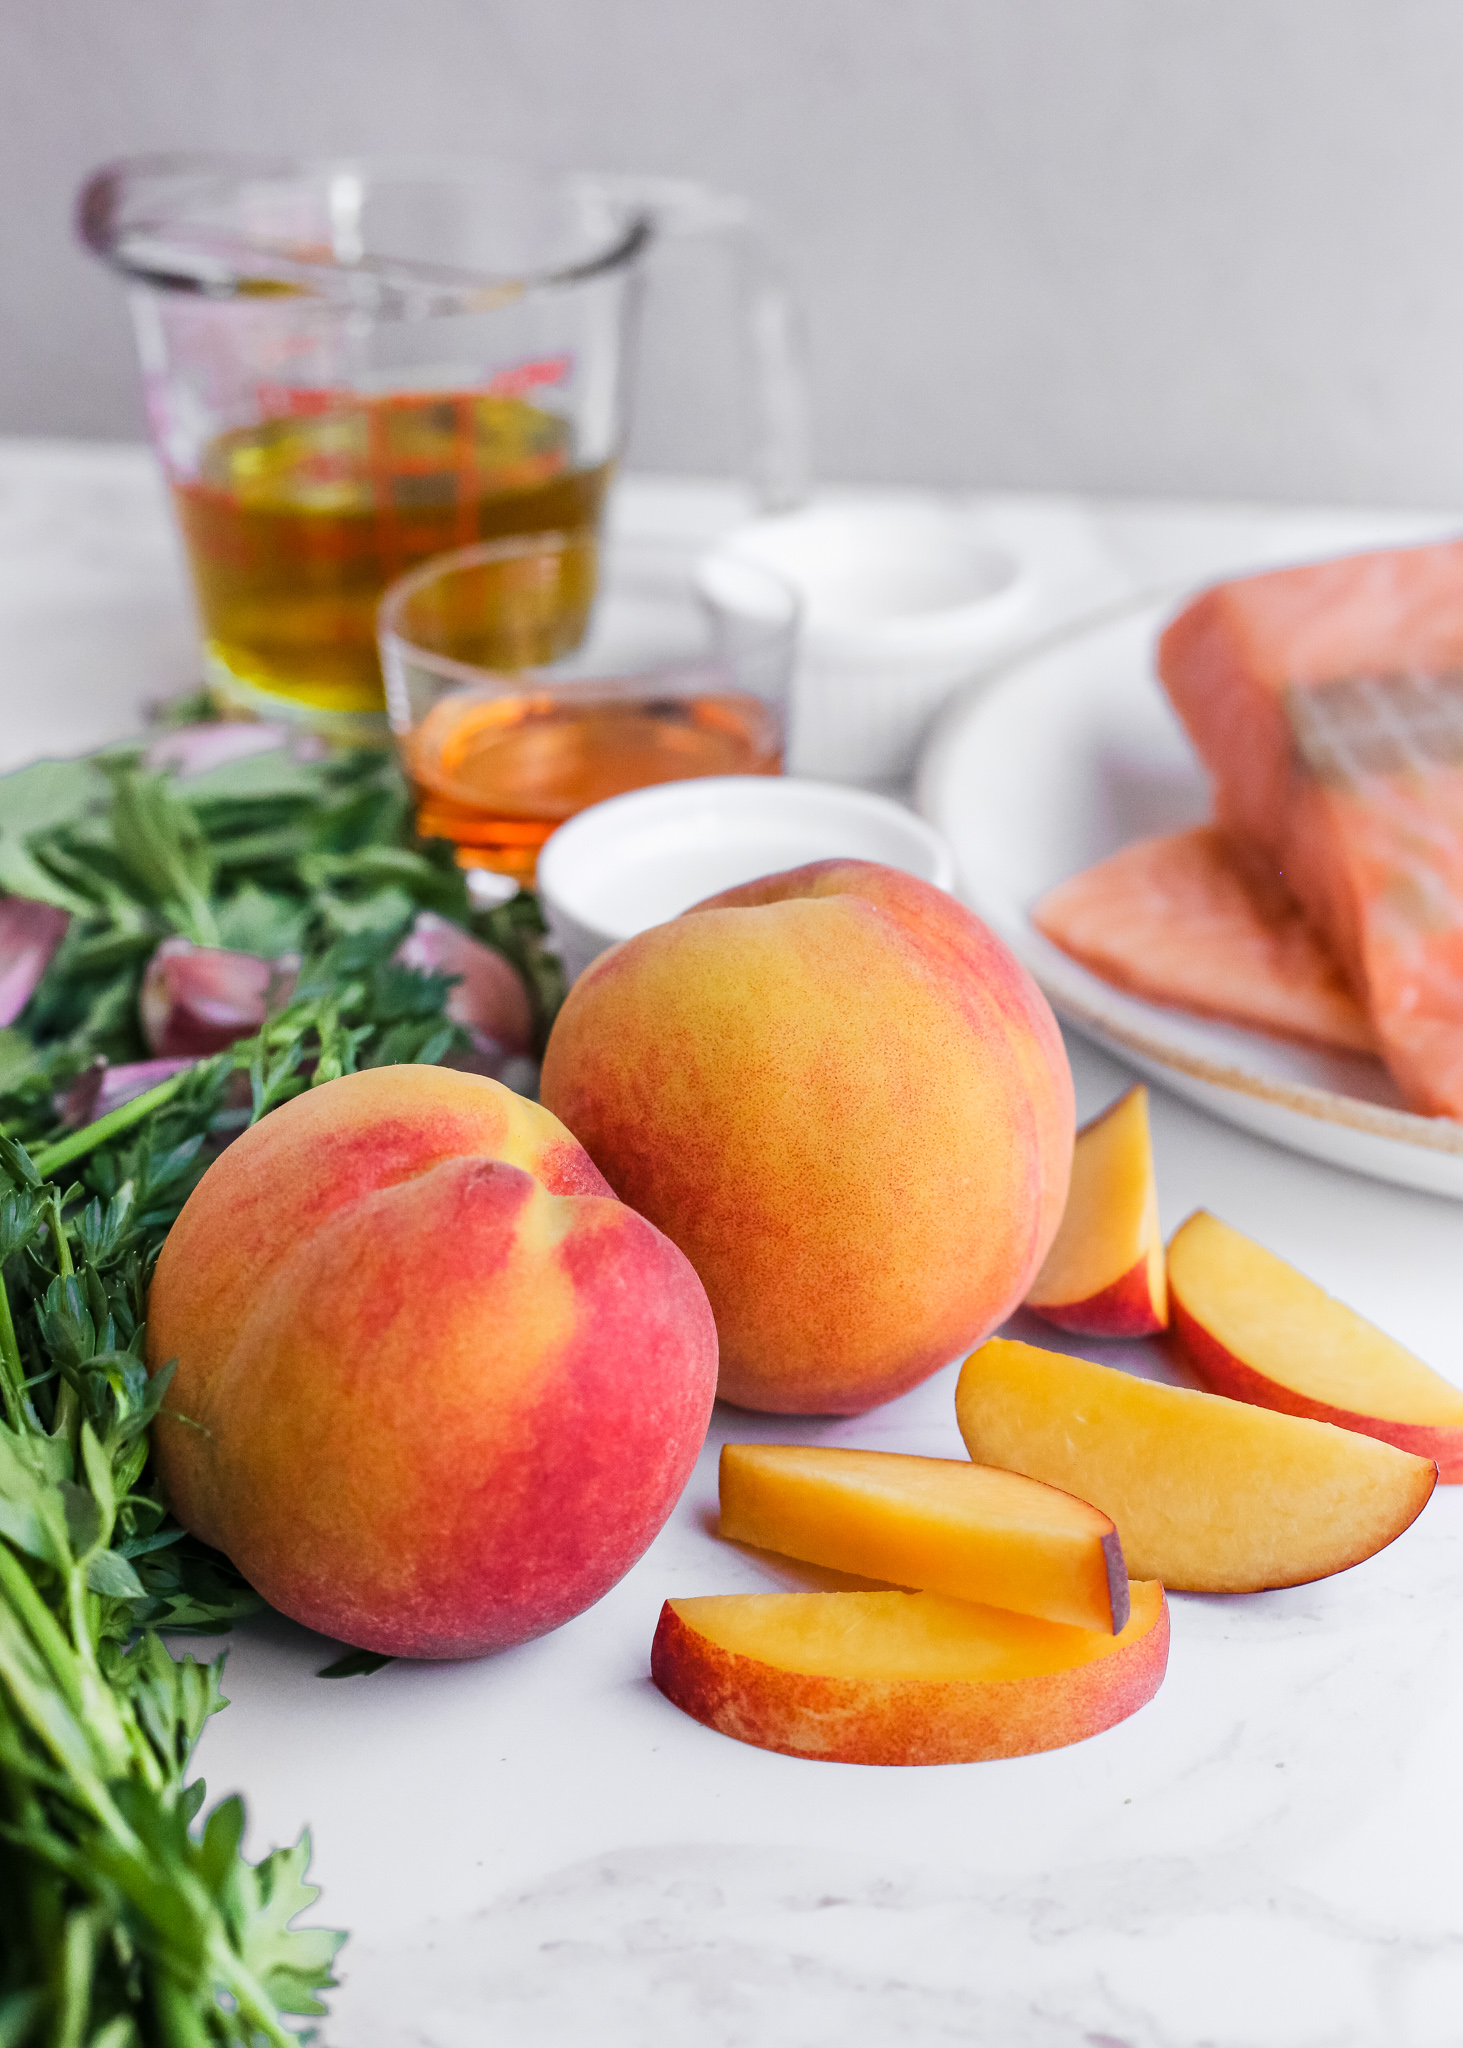 Two fresh peaches rest among other ingredients for a summer salmon salad, including fresh oregano, garlic cloves, red wine vinegar and olive oil, and fresh salmon fillets. A few slices of peaches are also including, showing the vibrant orange interior